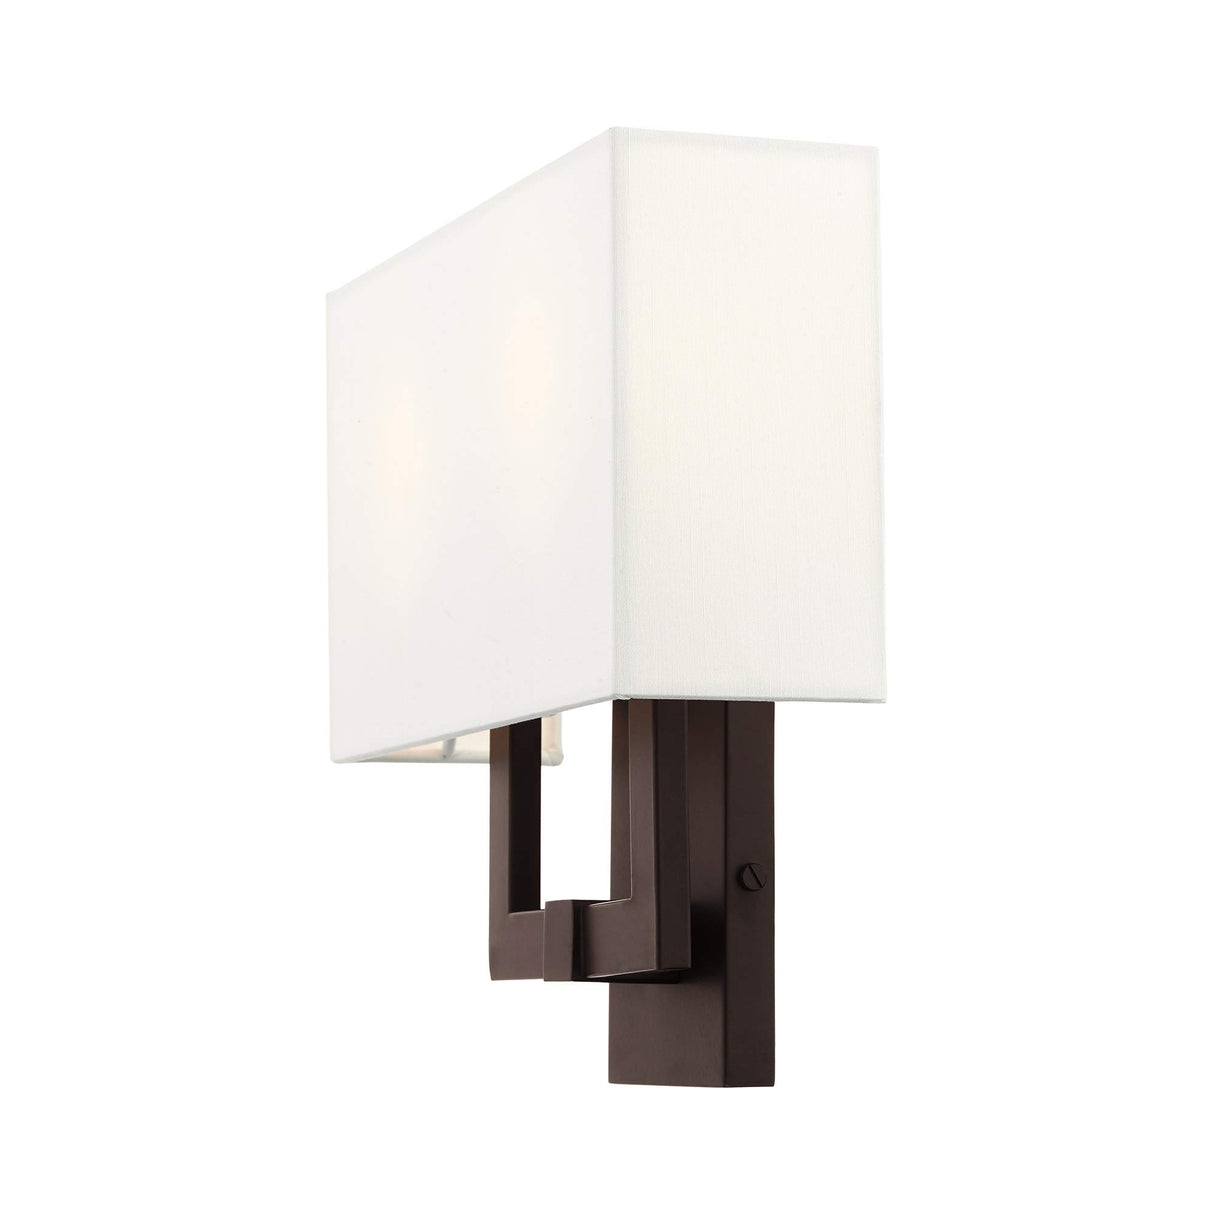 Livex Lighting 51103-07 Transitional Two Light Wall Sconce from Hollborn Collection in Bronze/Dark Finish